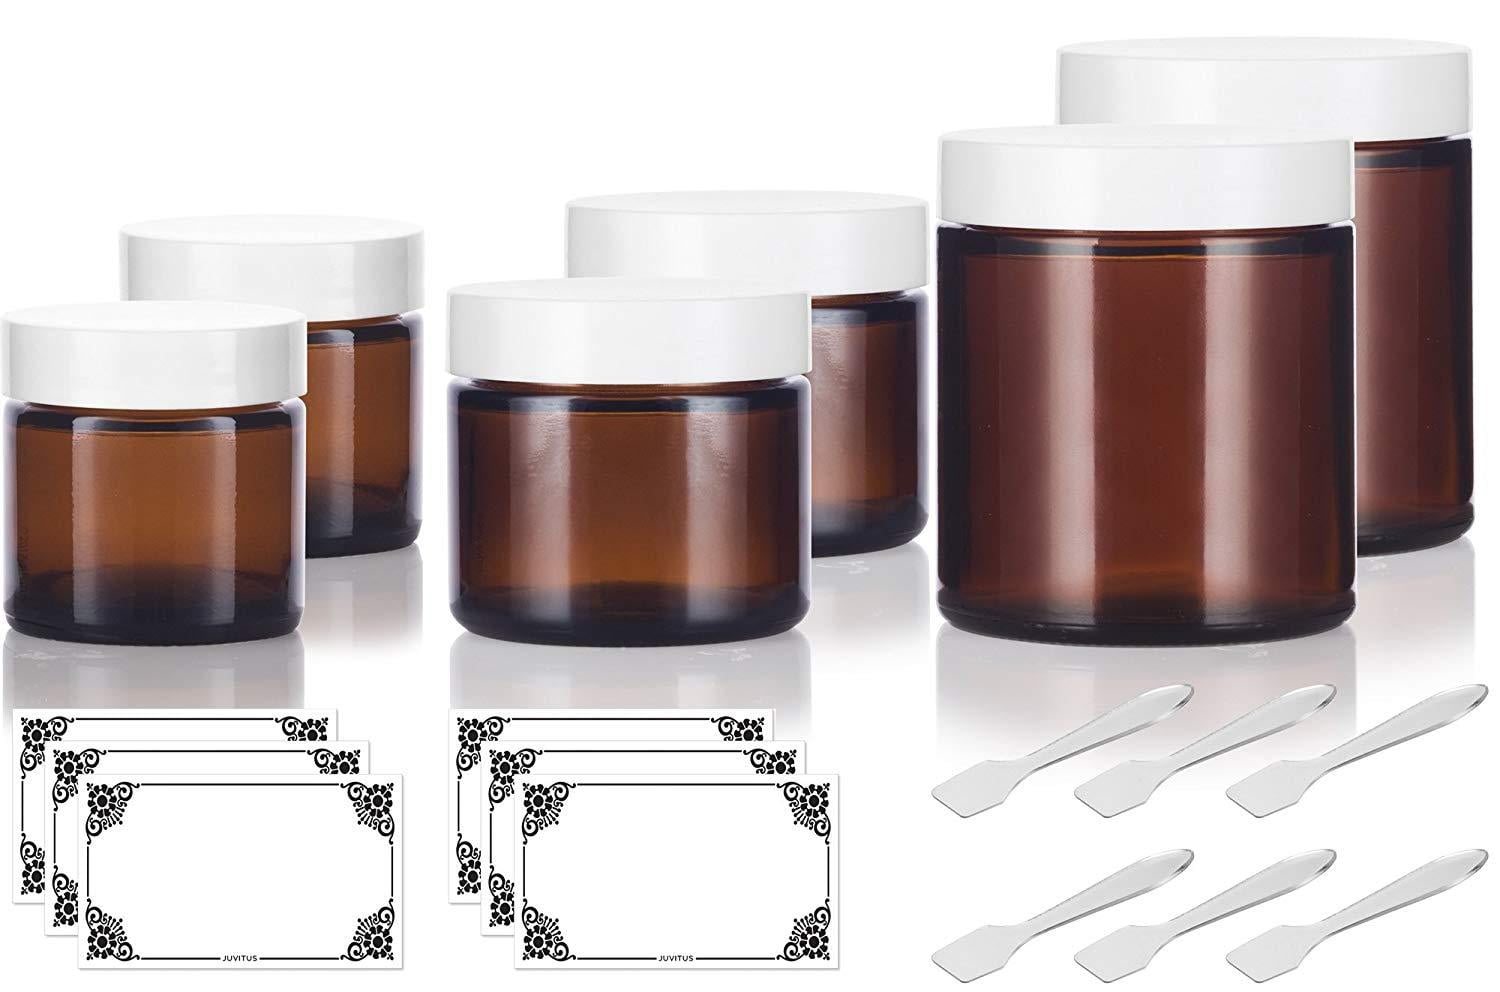 Amber Straight-Sided Jars In Many Sizes For Many Applications